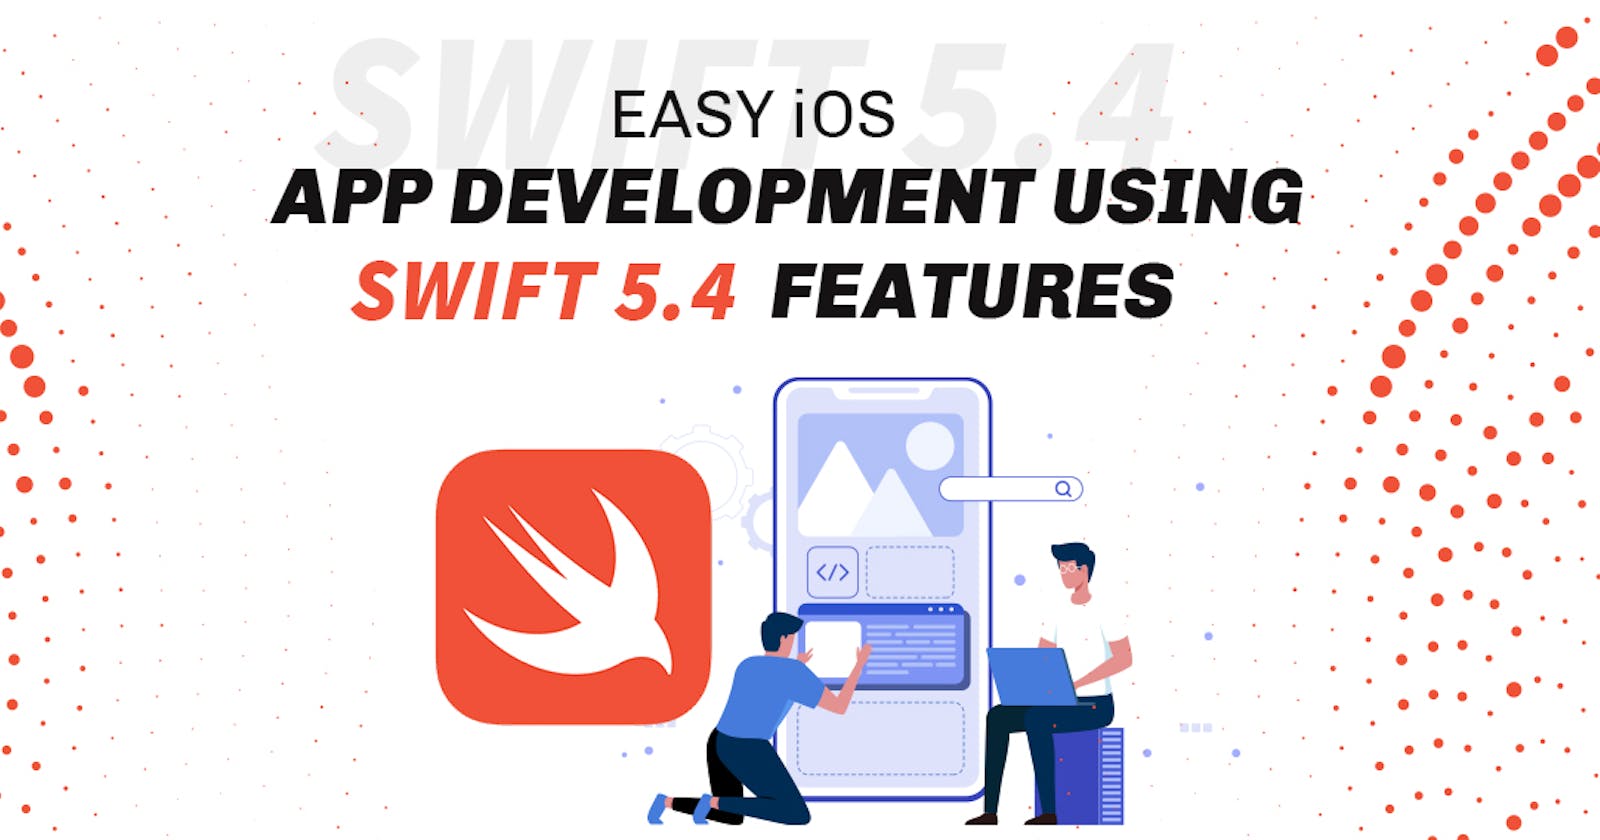 Easy Ios Application Development Using Top 5 Swift 5.4 Features